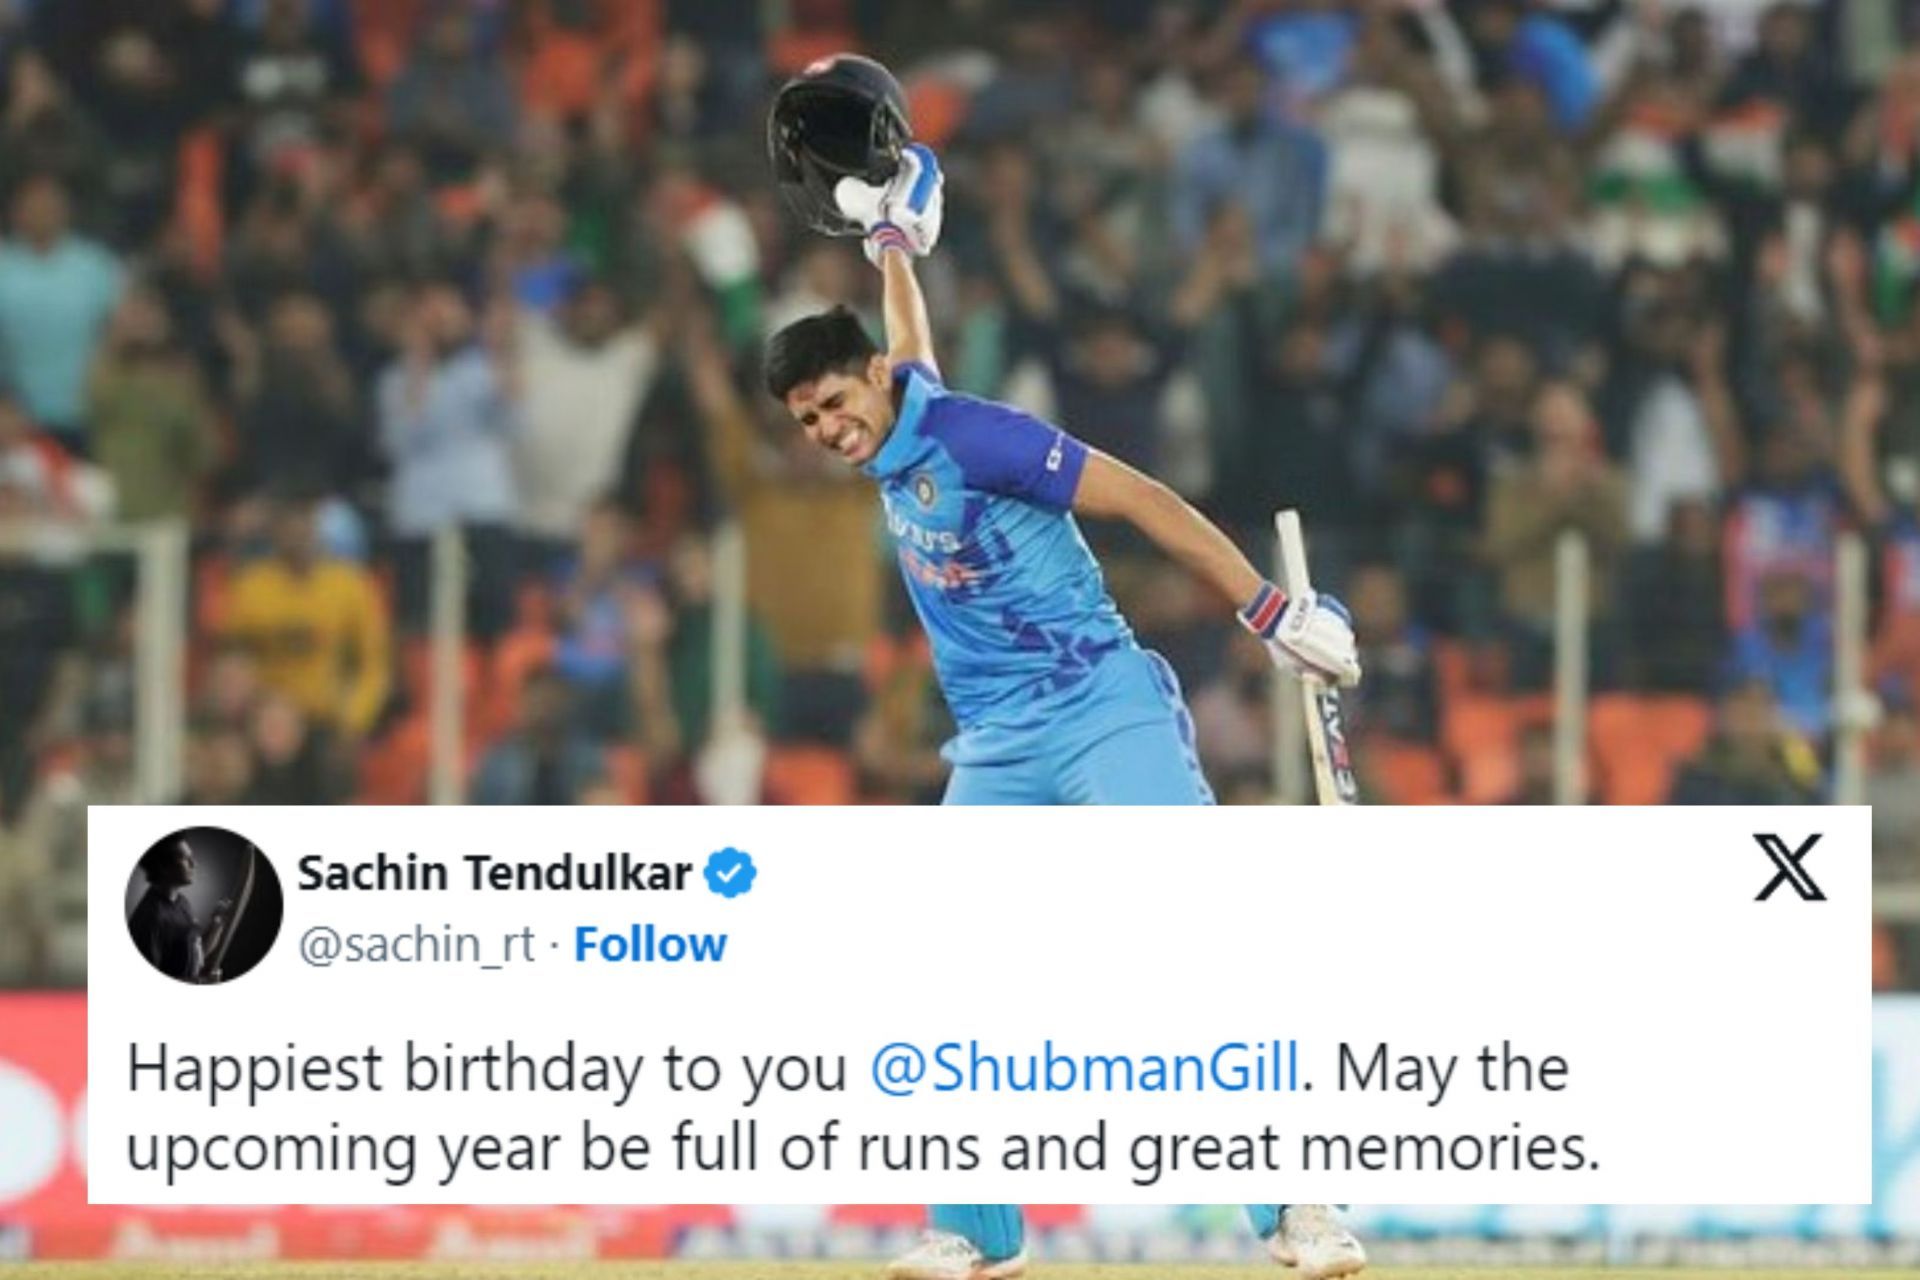 Shubman Gill received special wishes on Friday as he turned 24.